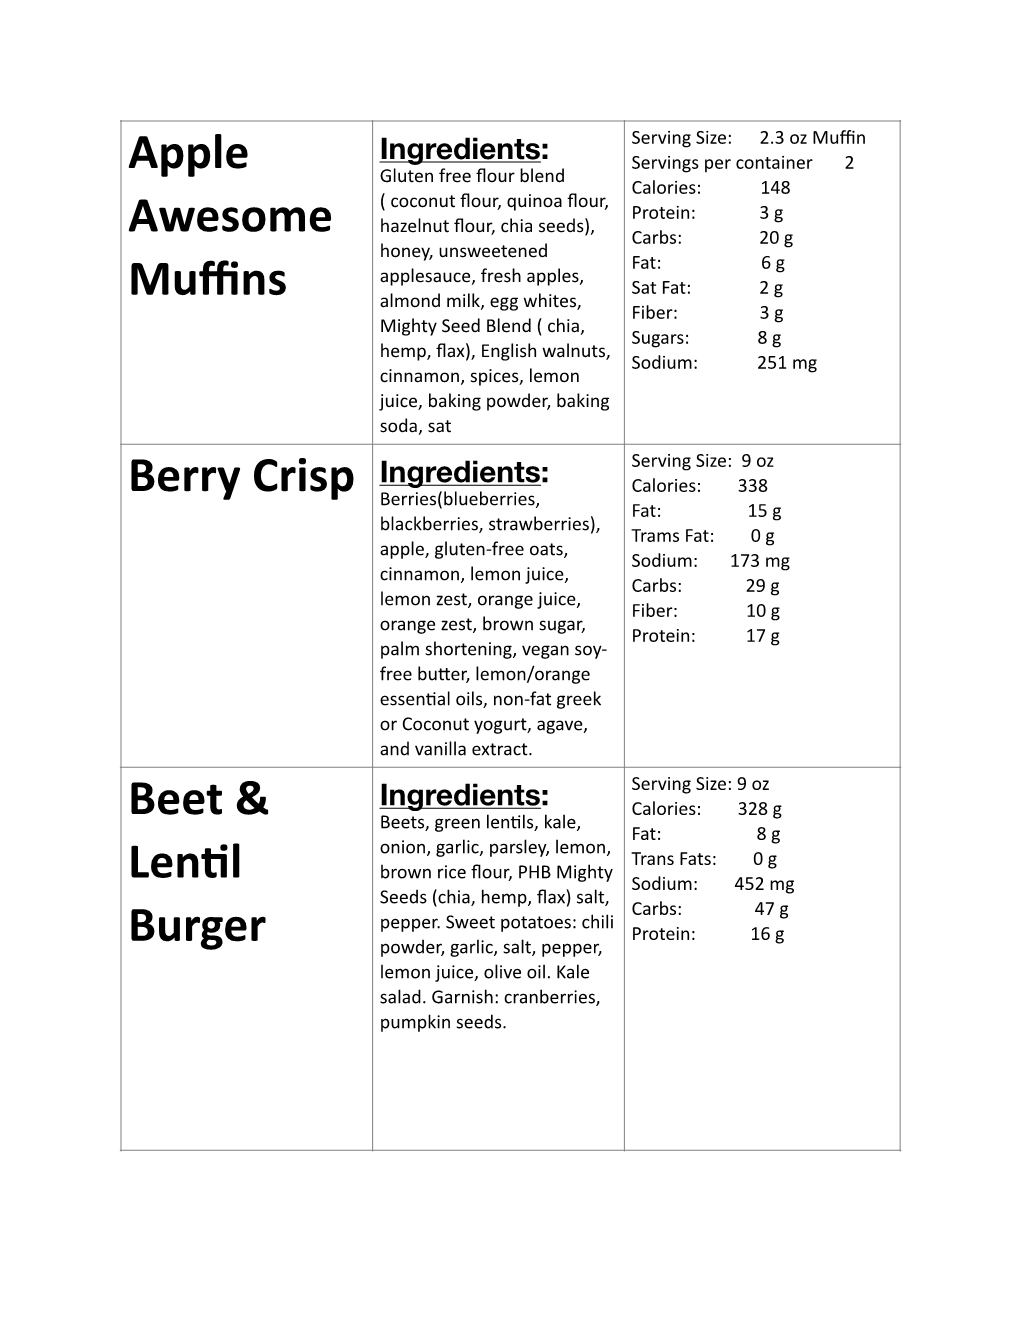 Ingredients & Nutrition Facts